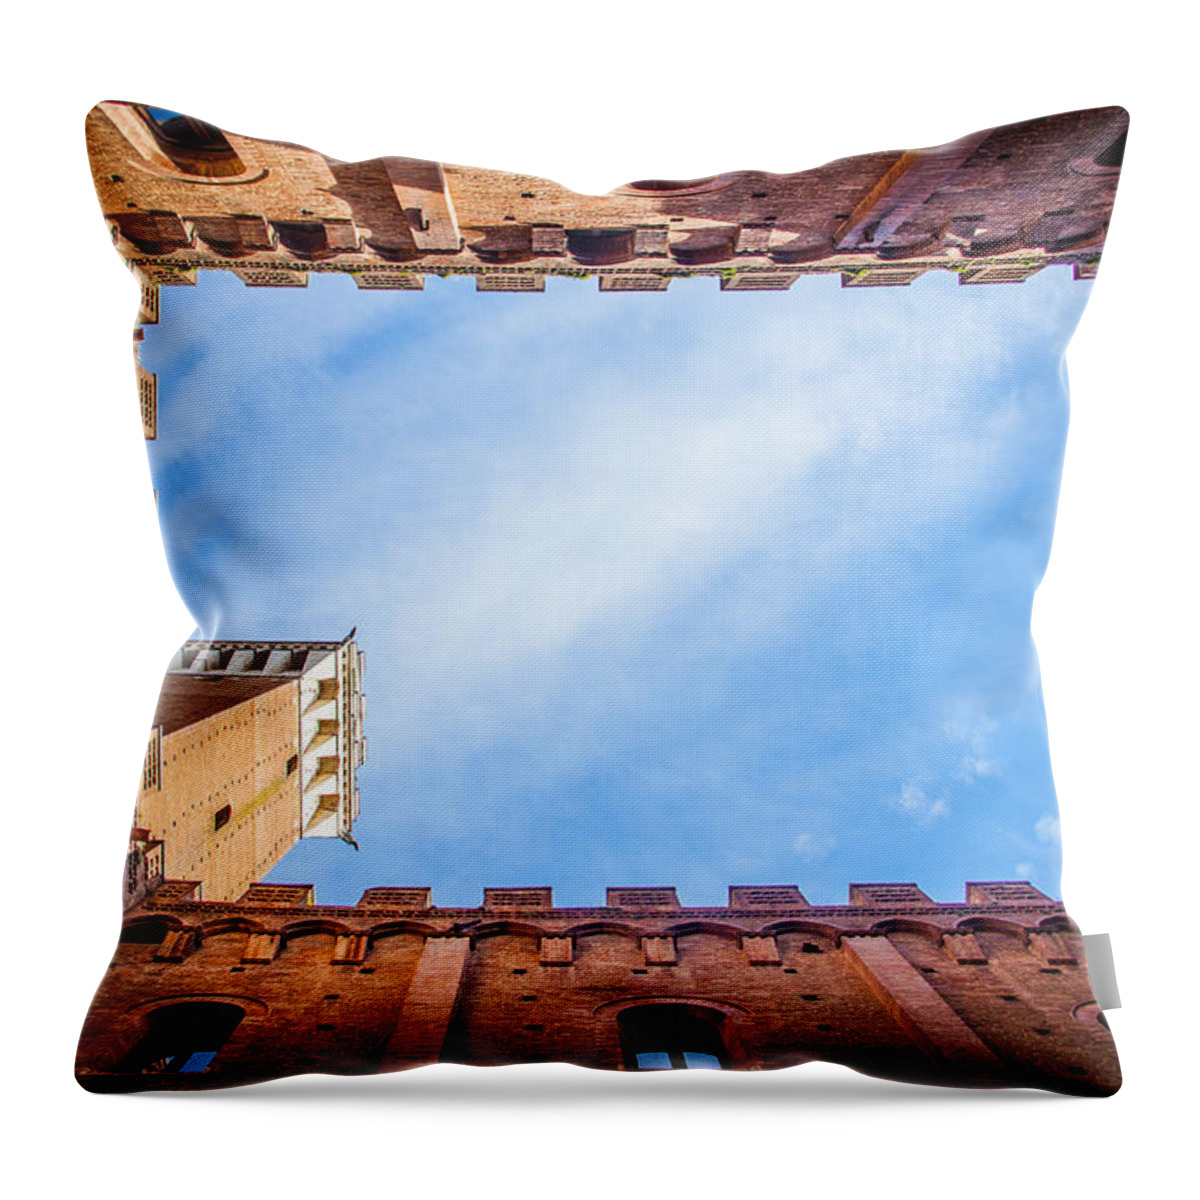 Siena Throw Pillow featuring the photograph Palazzo Pubblico by Ralf Kaiser